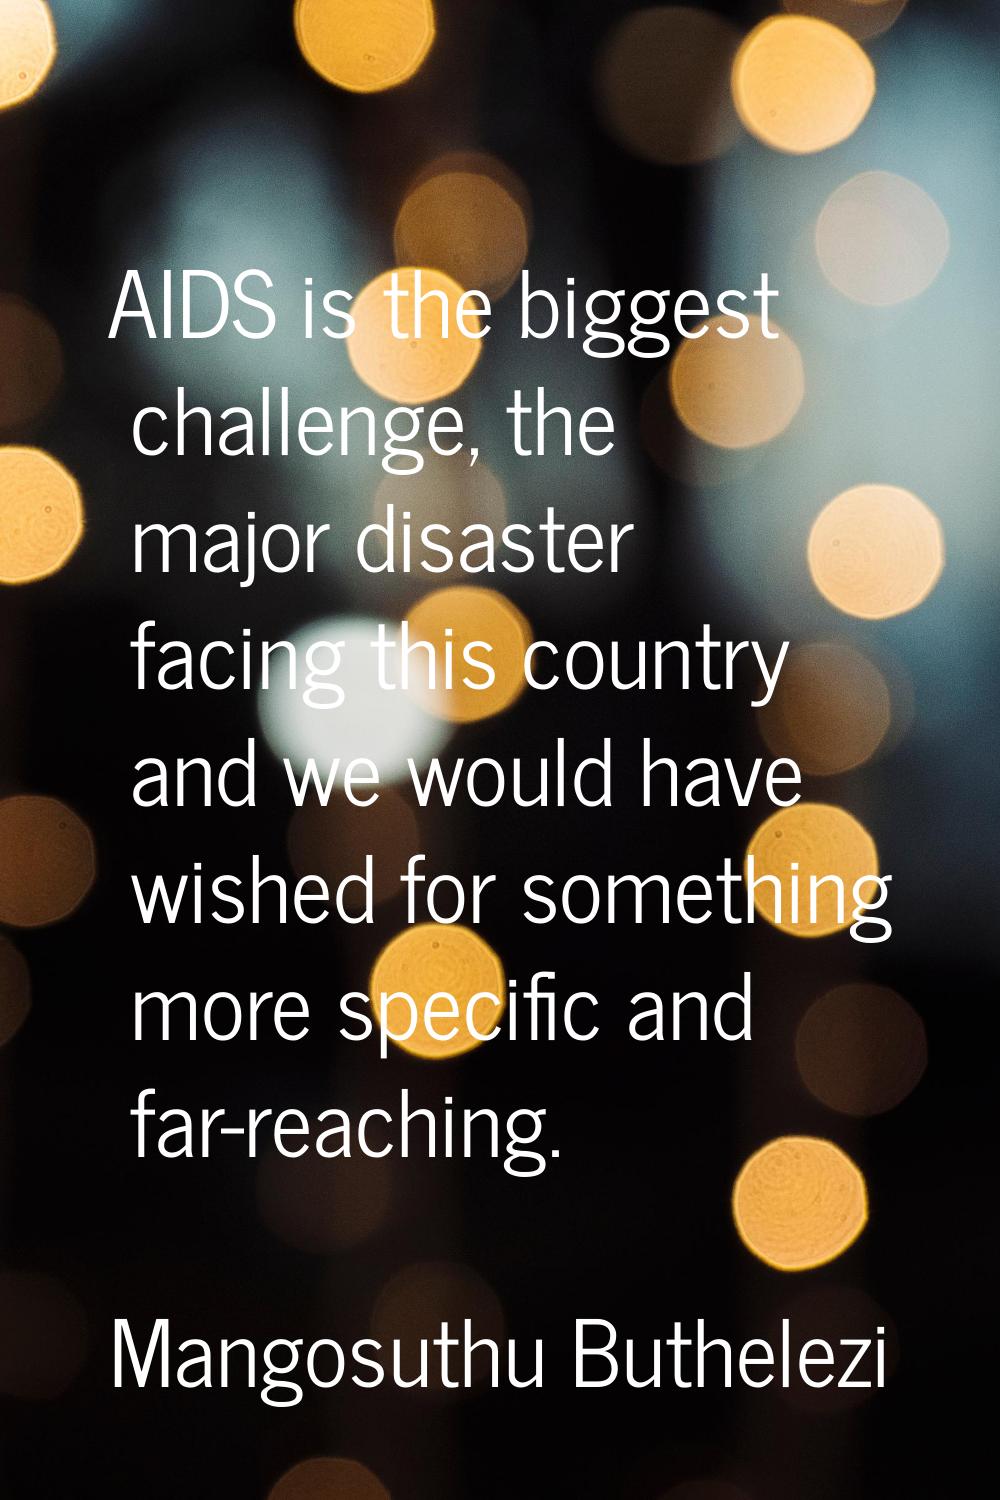 AIDS is the biggest challenge, the major disaster facing this country and we would have wished for 